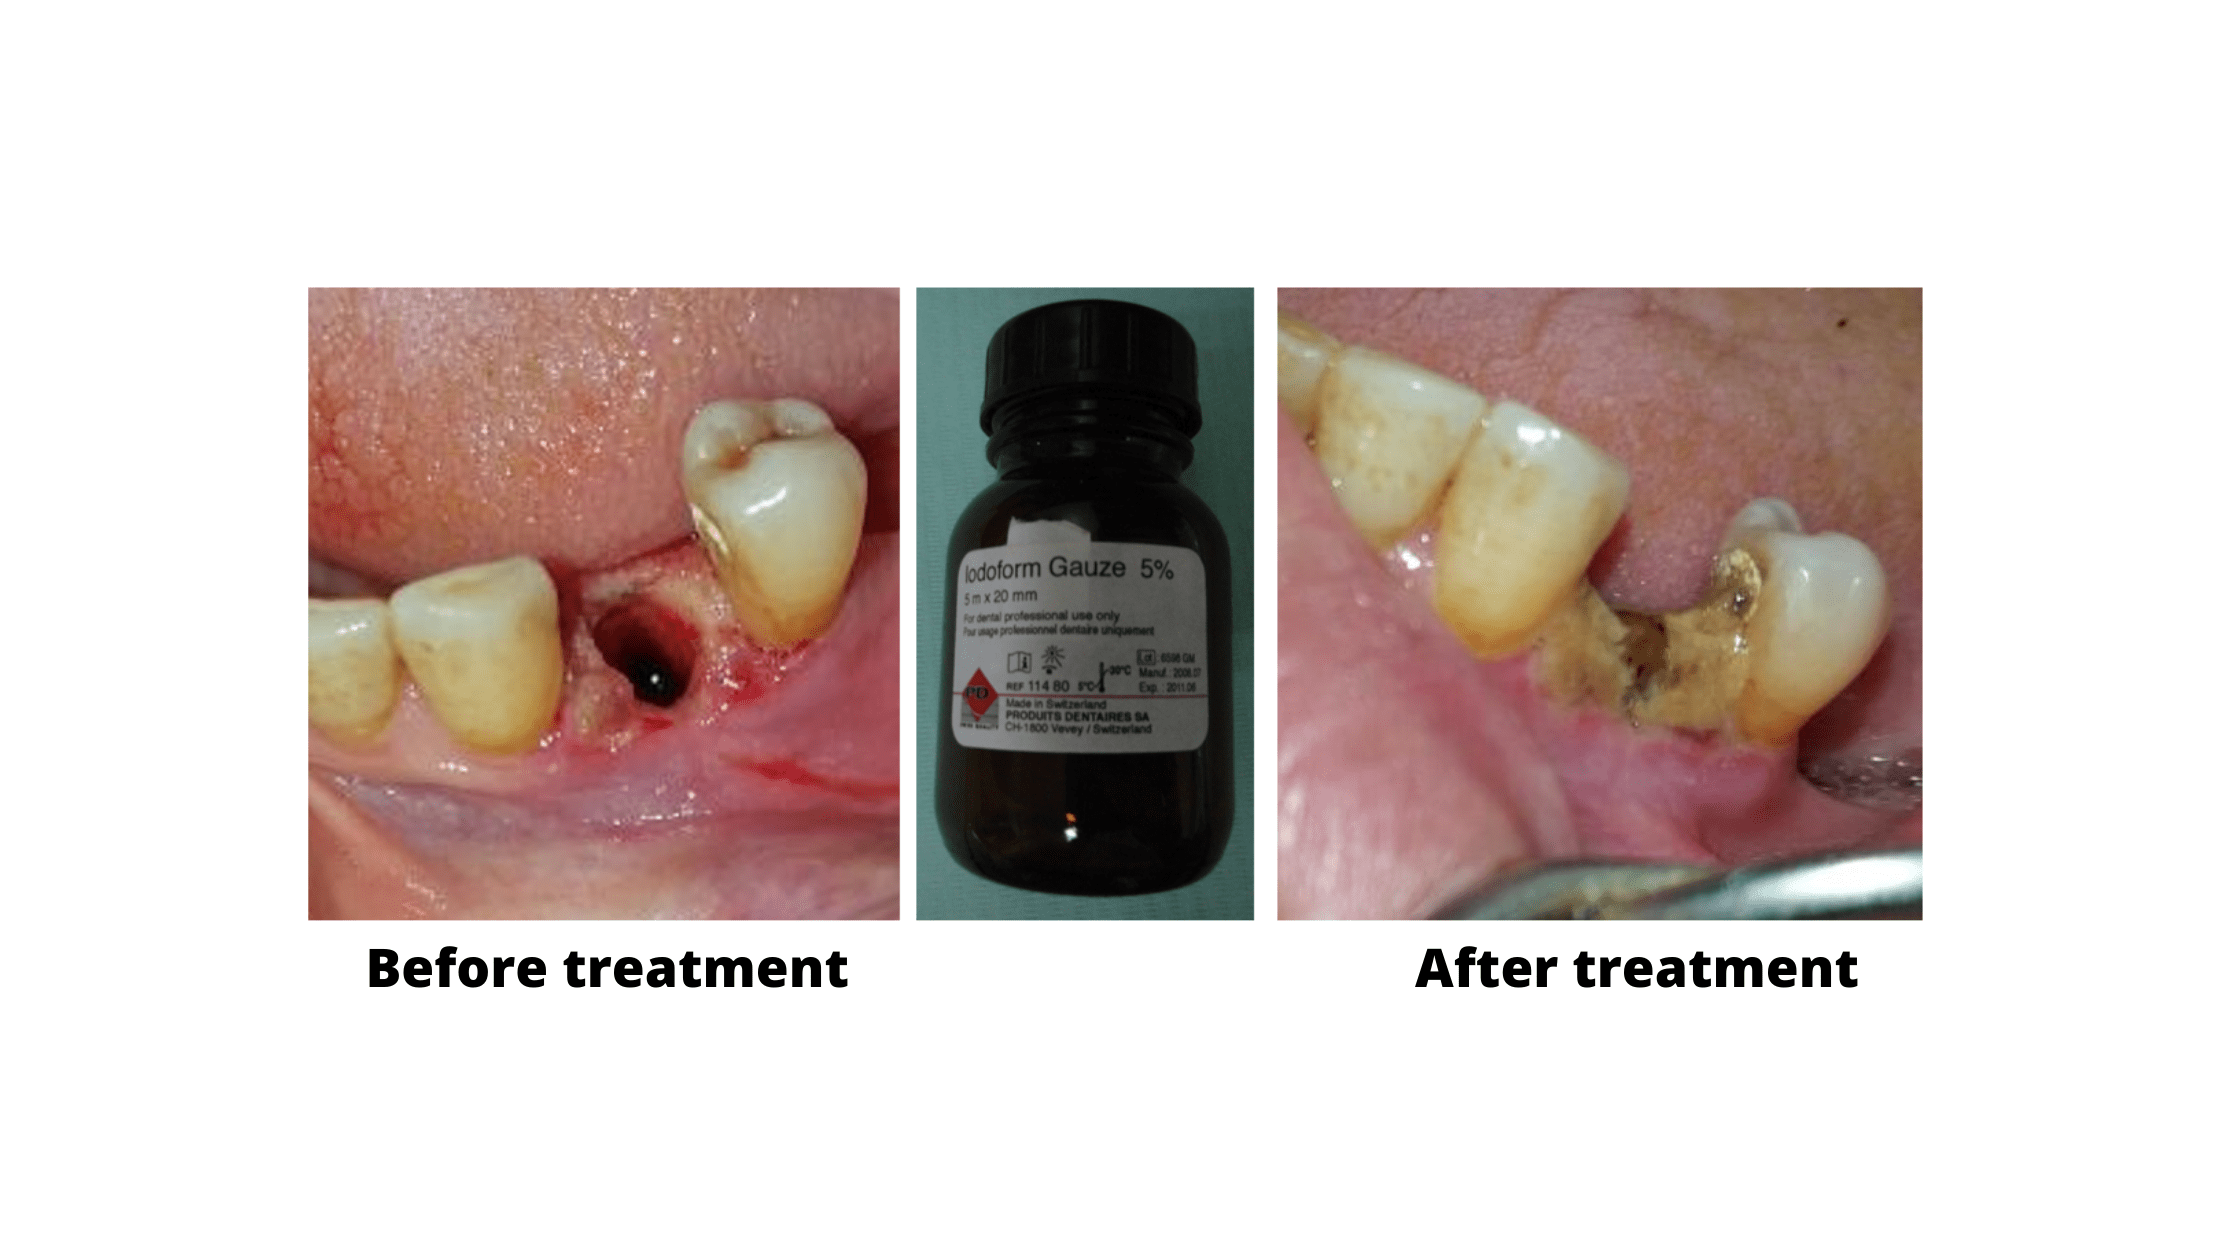 Dry socket before and after treatment (with Iodoform Gauze 5%): Clinical images